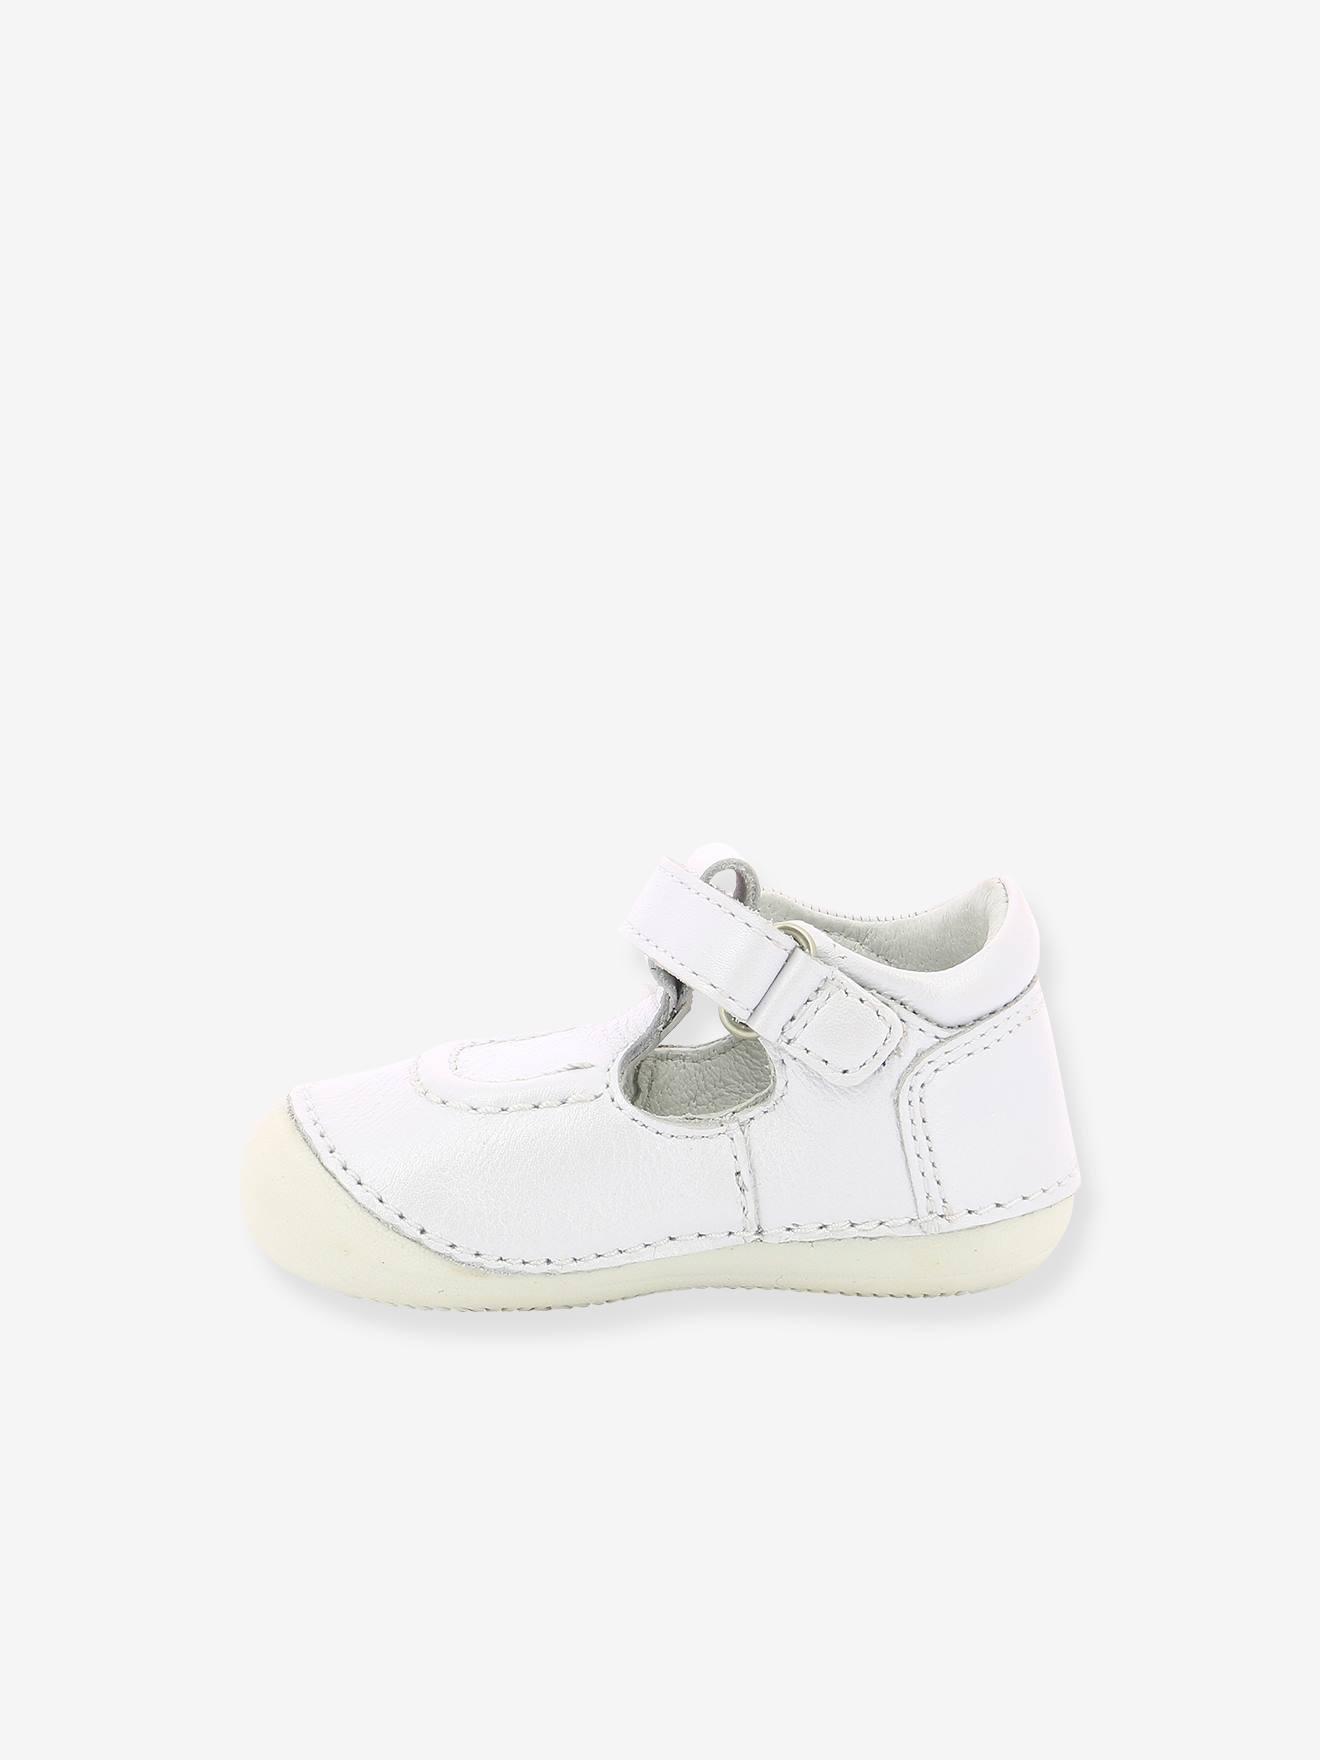 Sandales Cuir Bebe Fille Salome Kickers 1ers Pas Blanc Chaussures